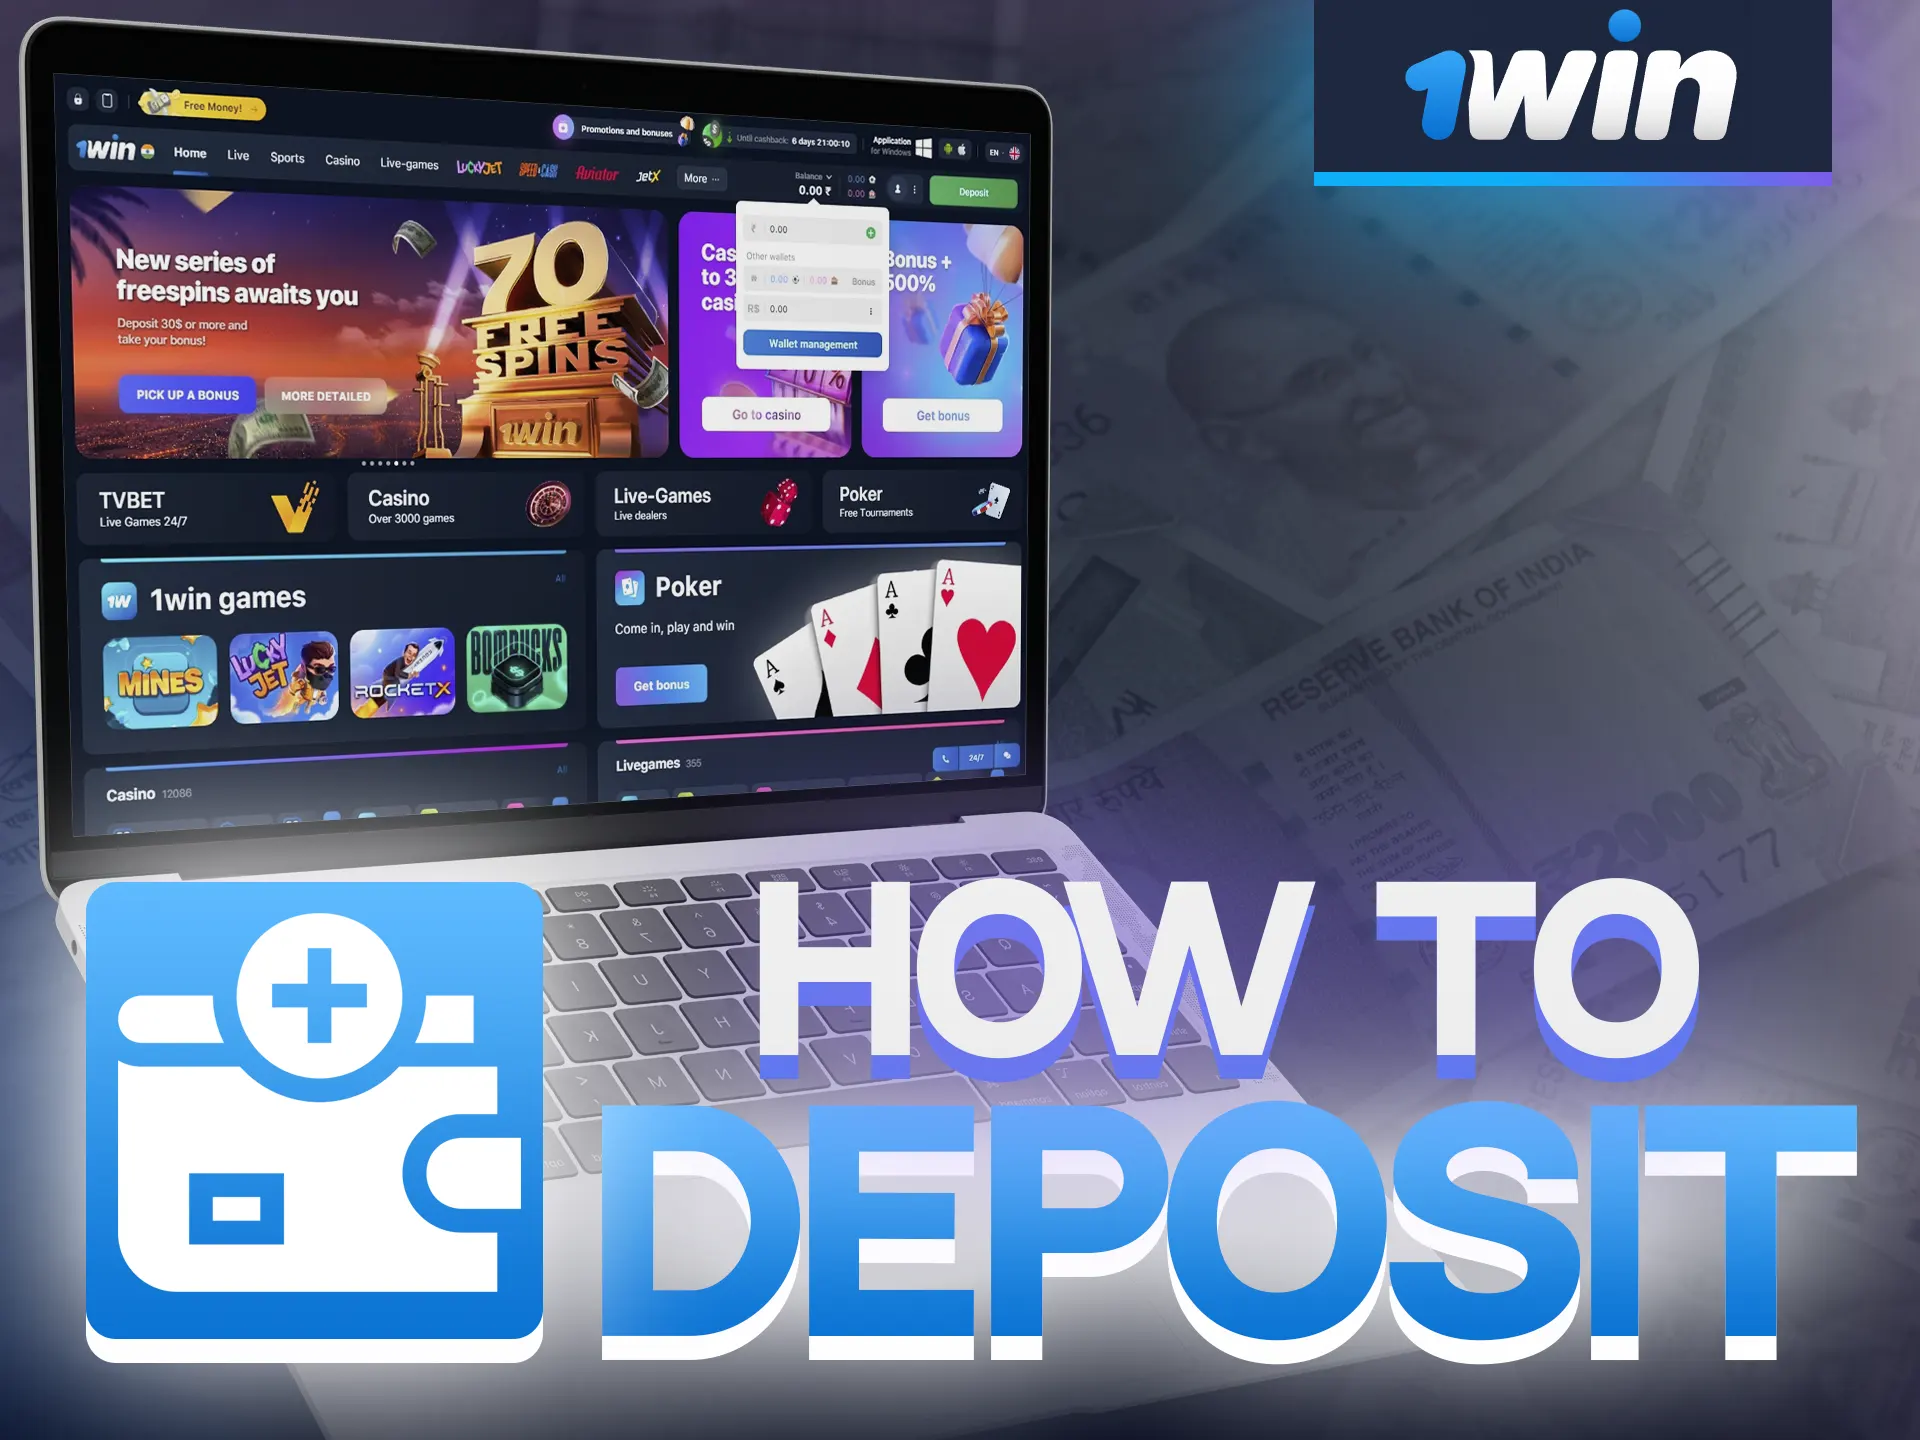 With these instructions it is easy to make your first deposit on 1Win.